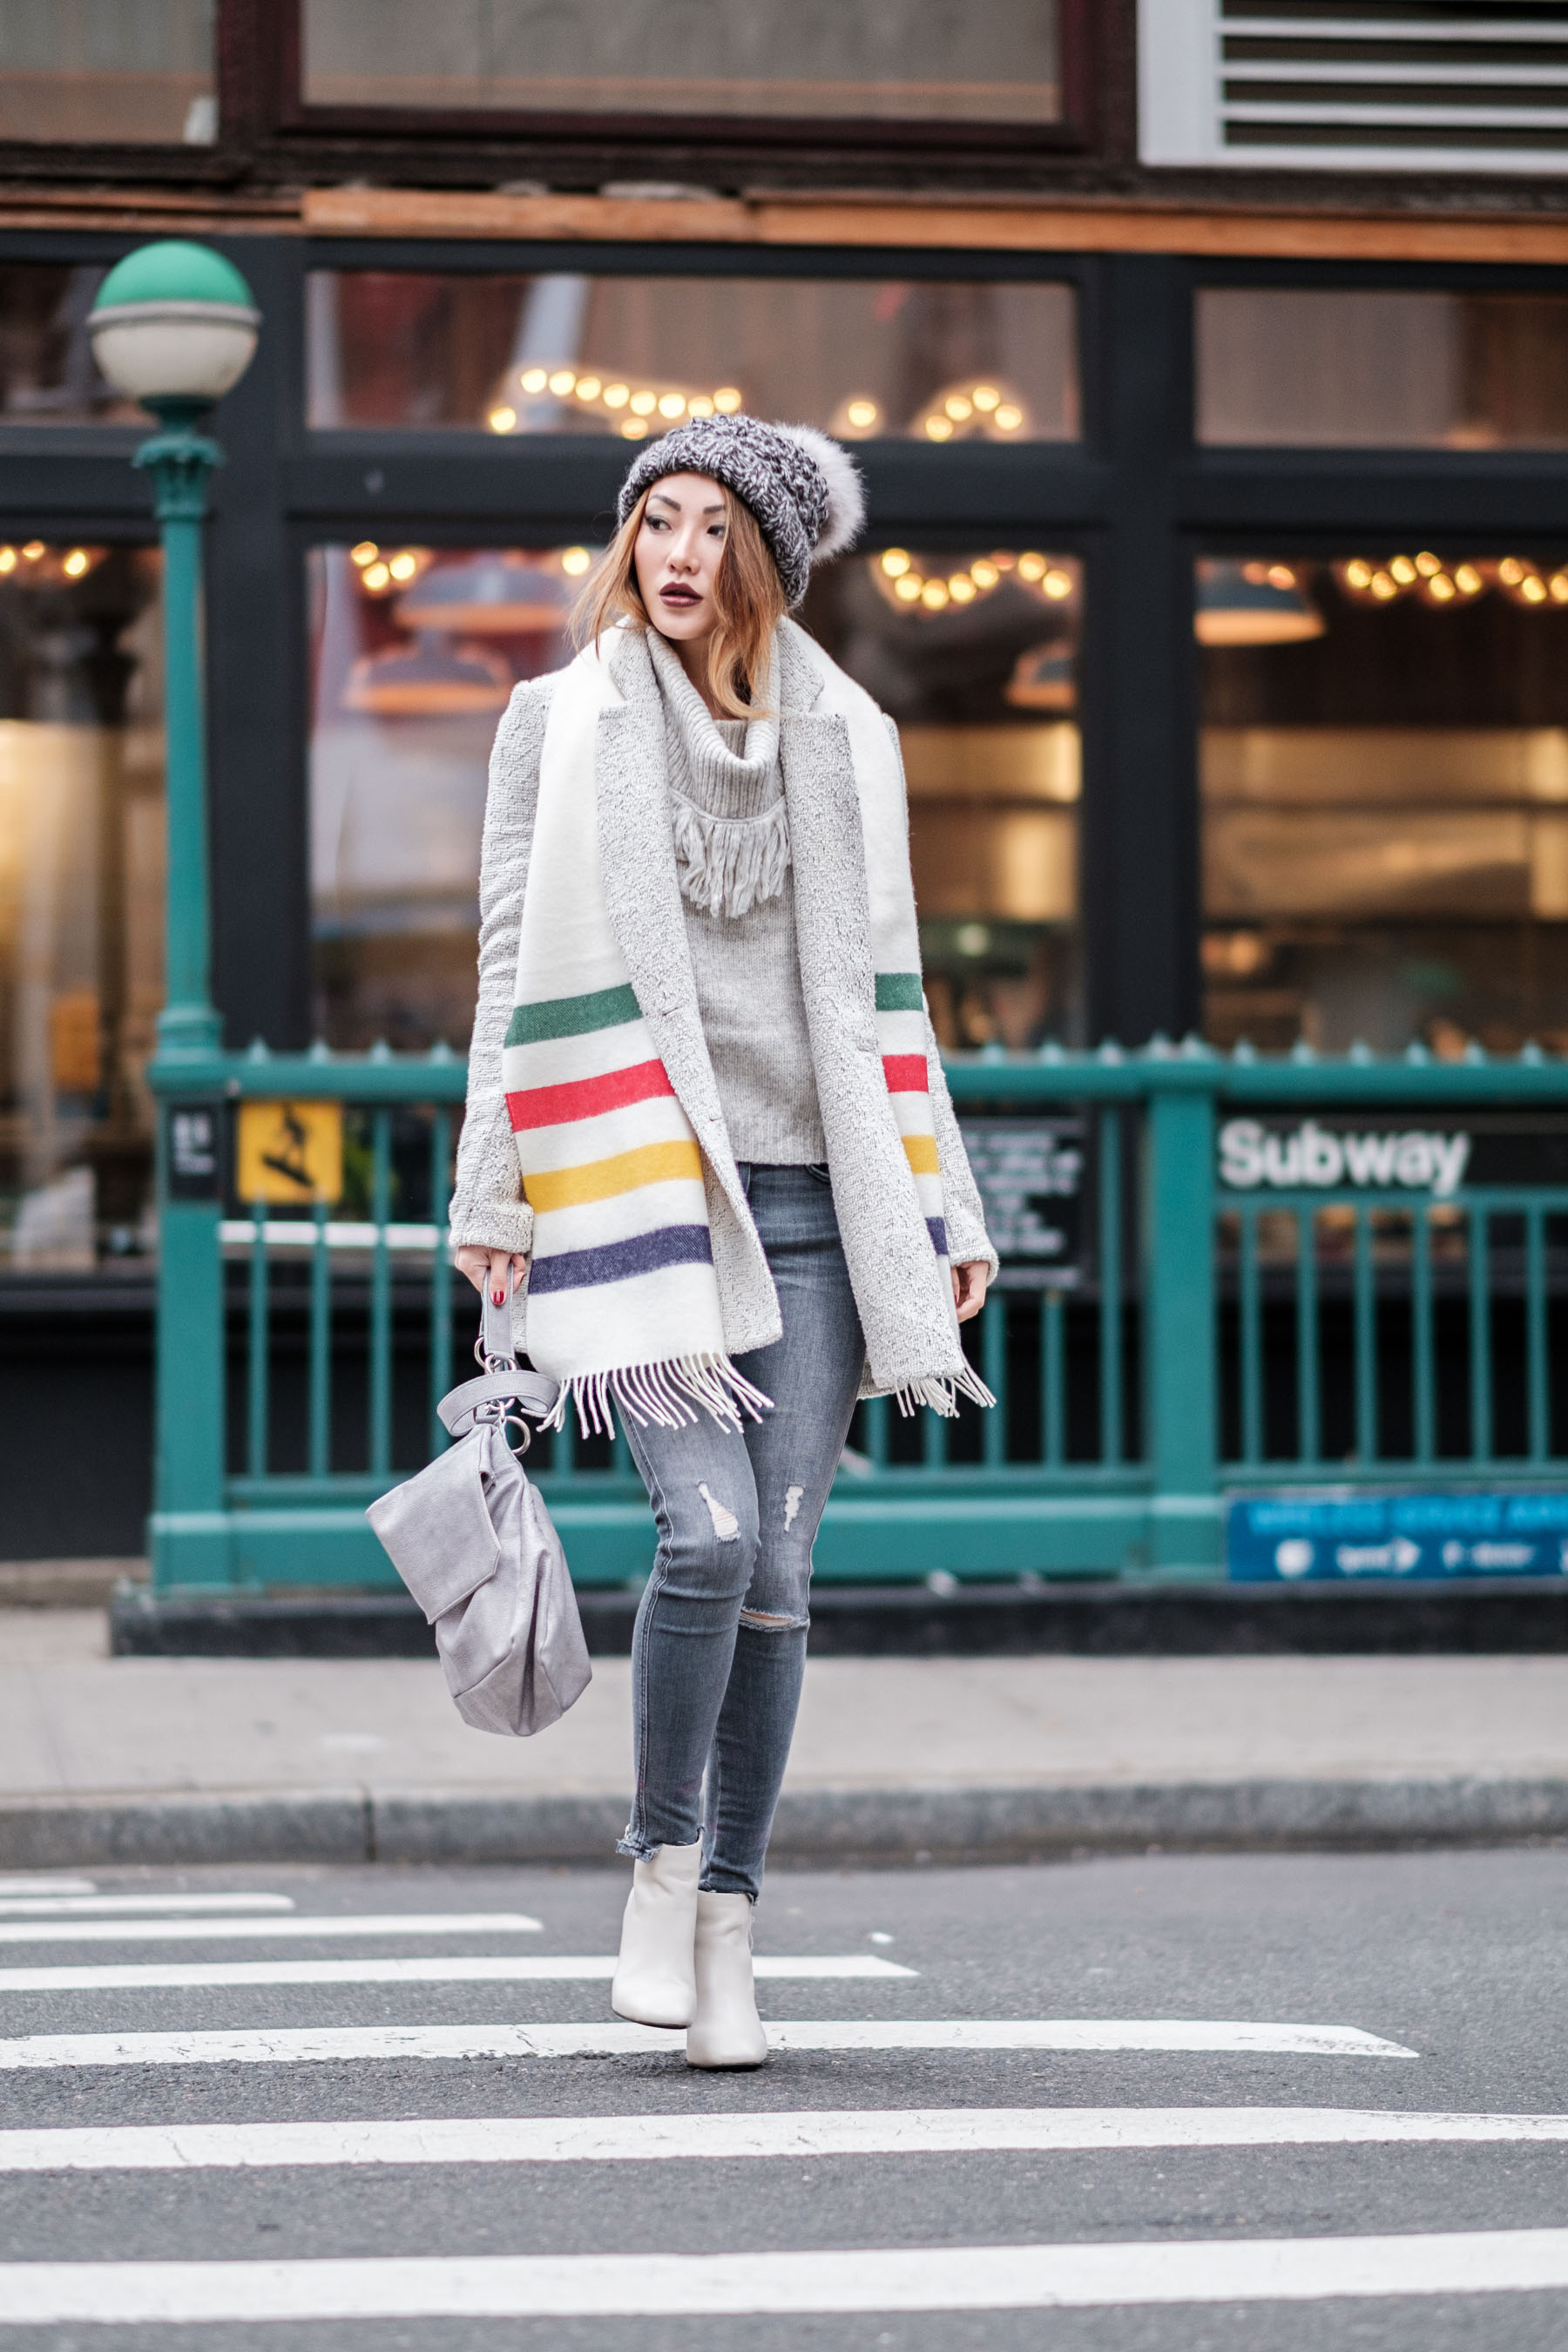 Types of Scarves - Colorful Striped Scarf // Notjessfashion.com // New York fashion blogger, asian blogger, fashion blogger street style, street style fashion, new york street style, winter outfit, cozy winter outfit, layered outfit, winter layers, senso boots, gray denim, distressed denim, gray denim outfit, free people sweater, cute winter style, gray marled pom pom beanie